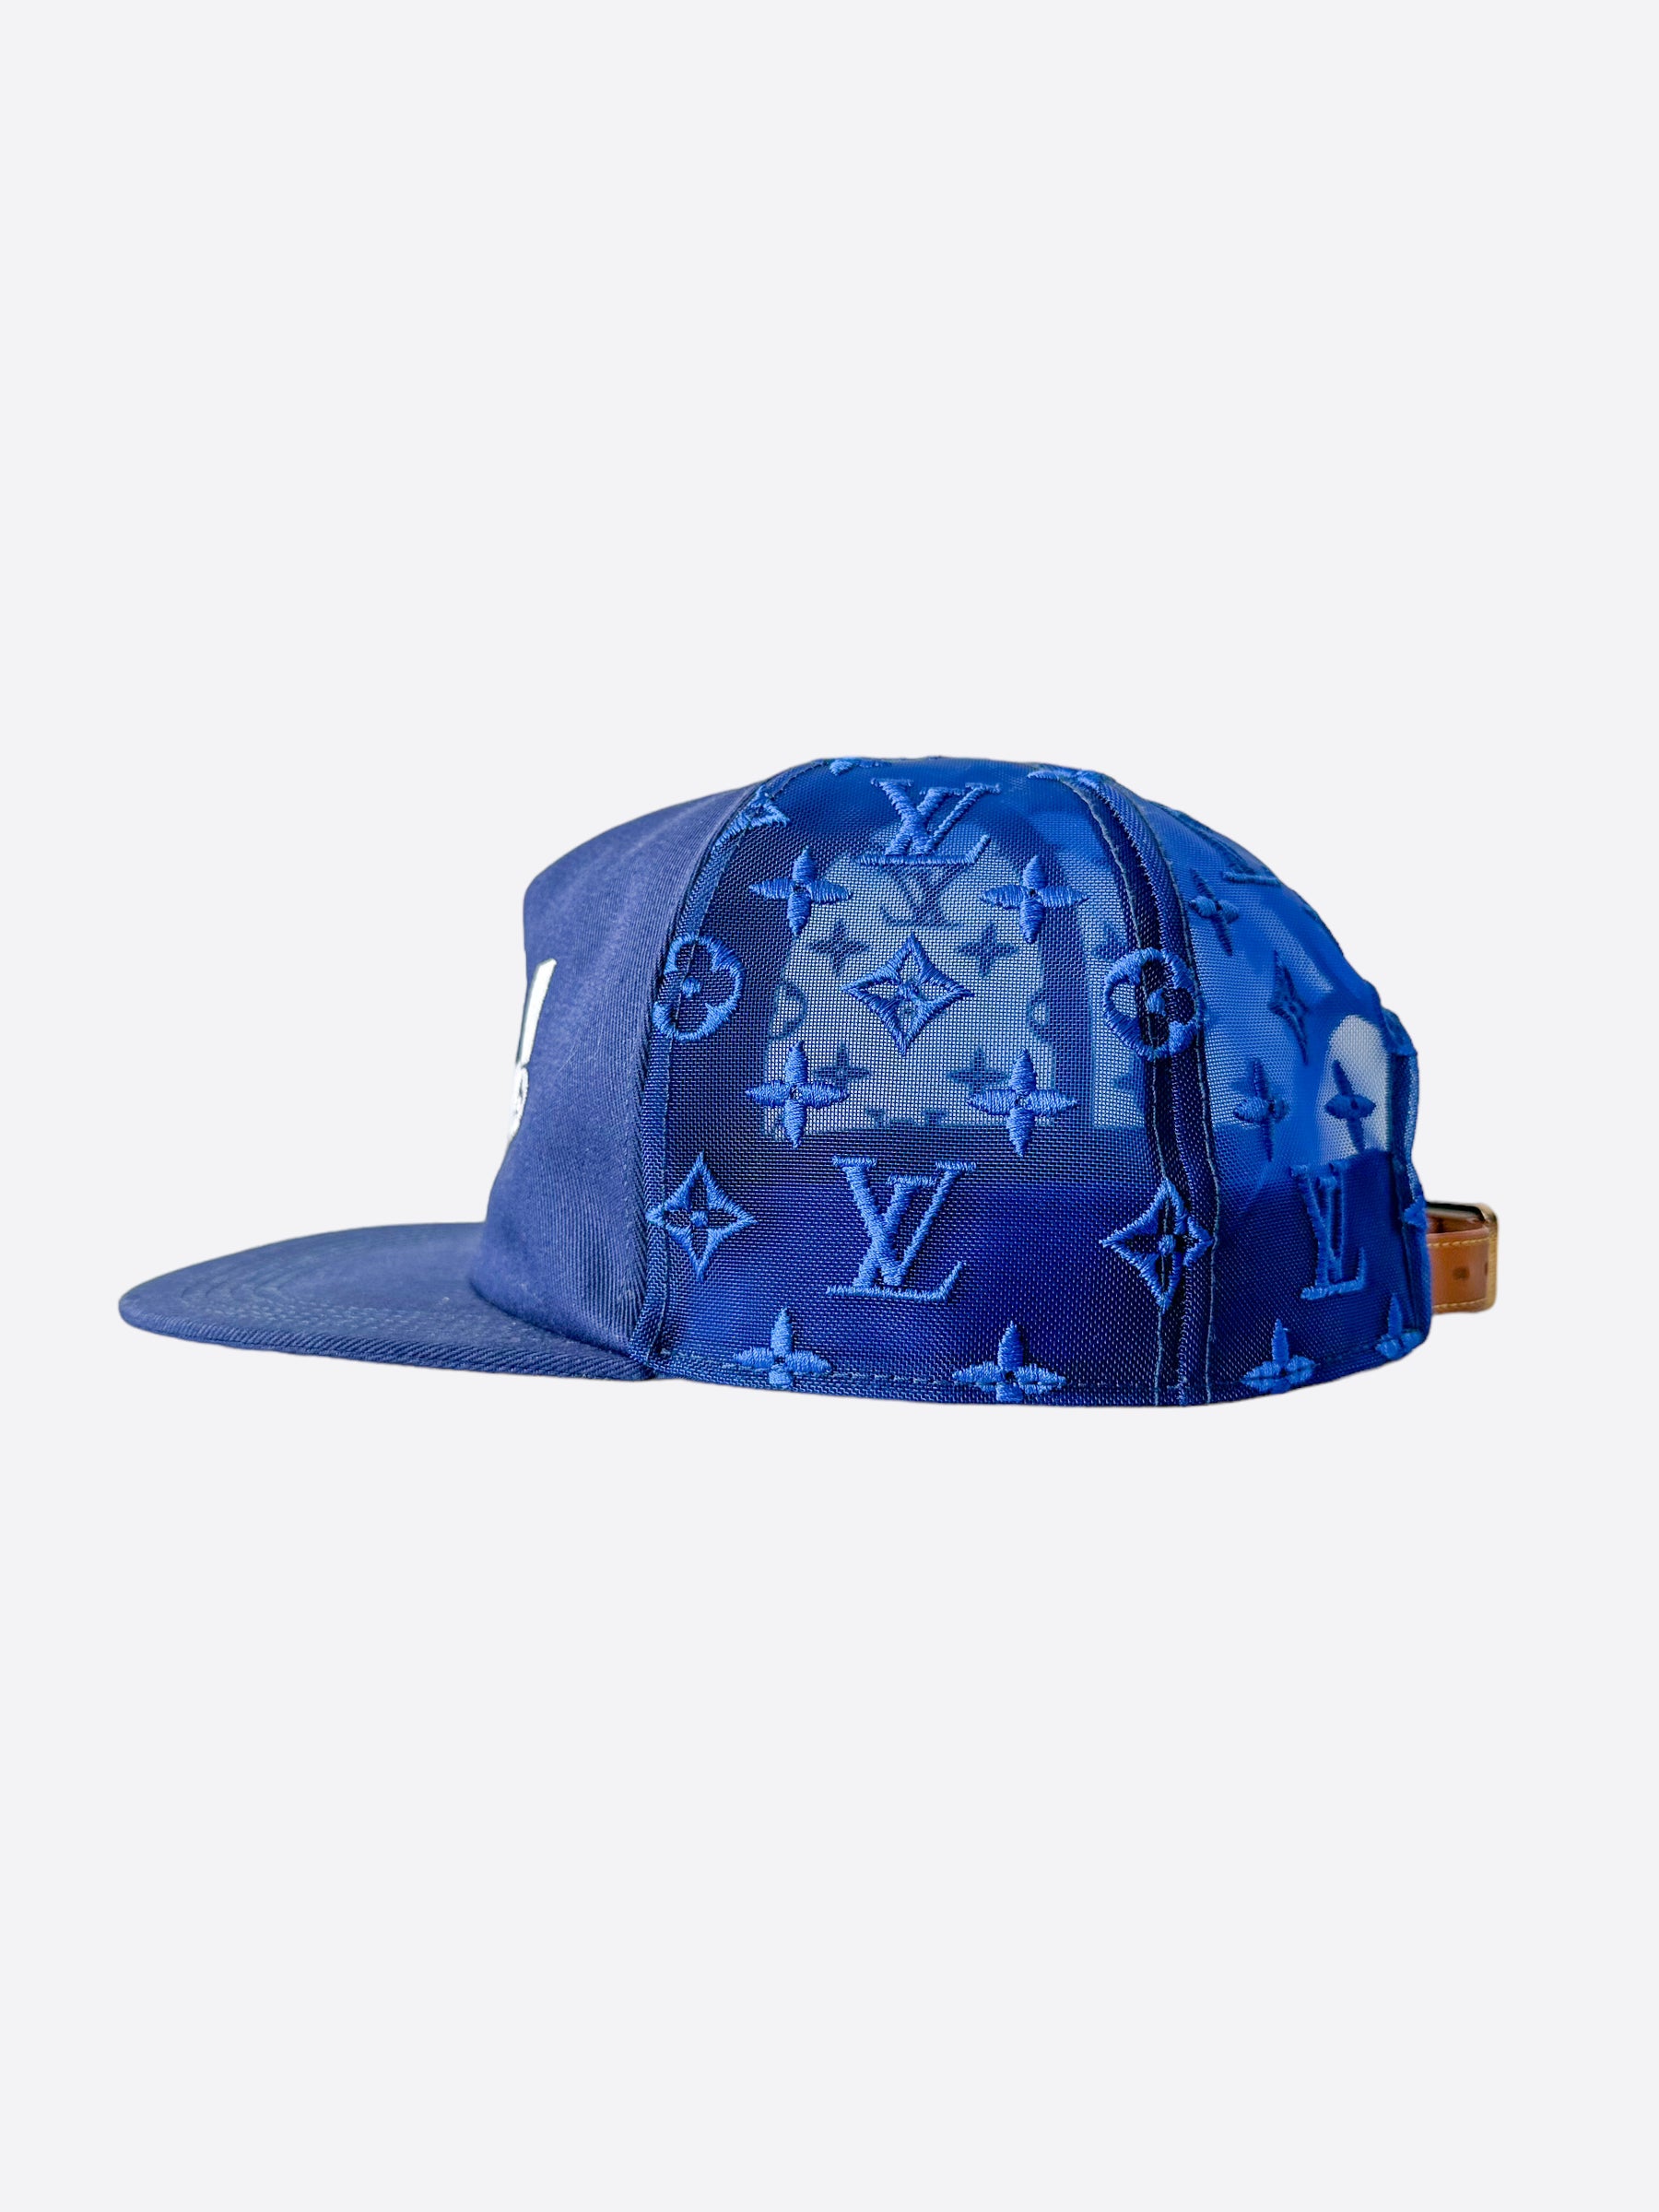 LOUIS VUITTON Mesh Embroidered Everyday LV Cap 58 Blue 989604